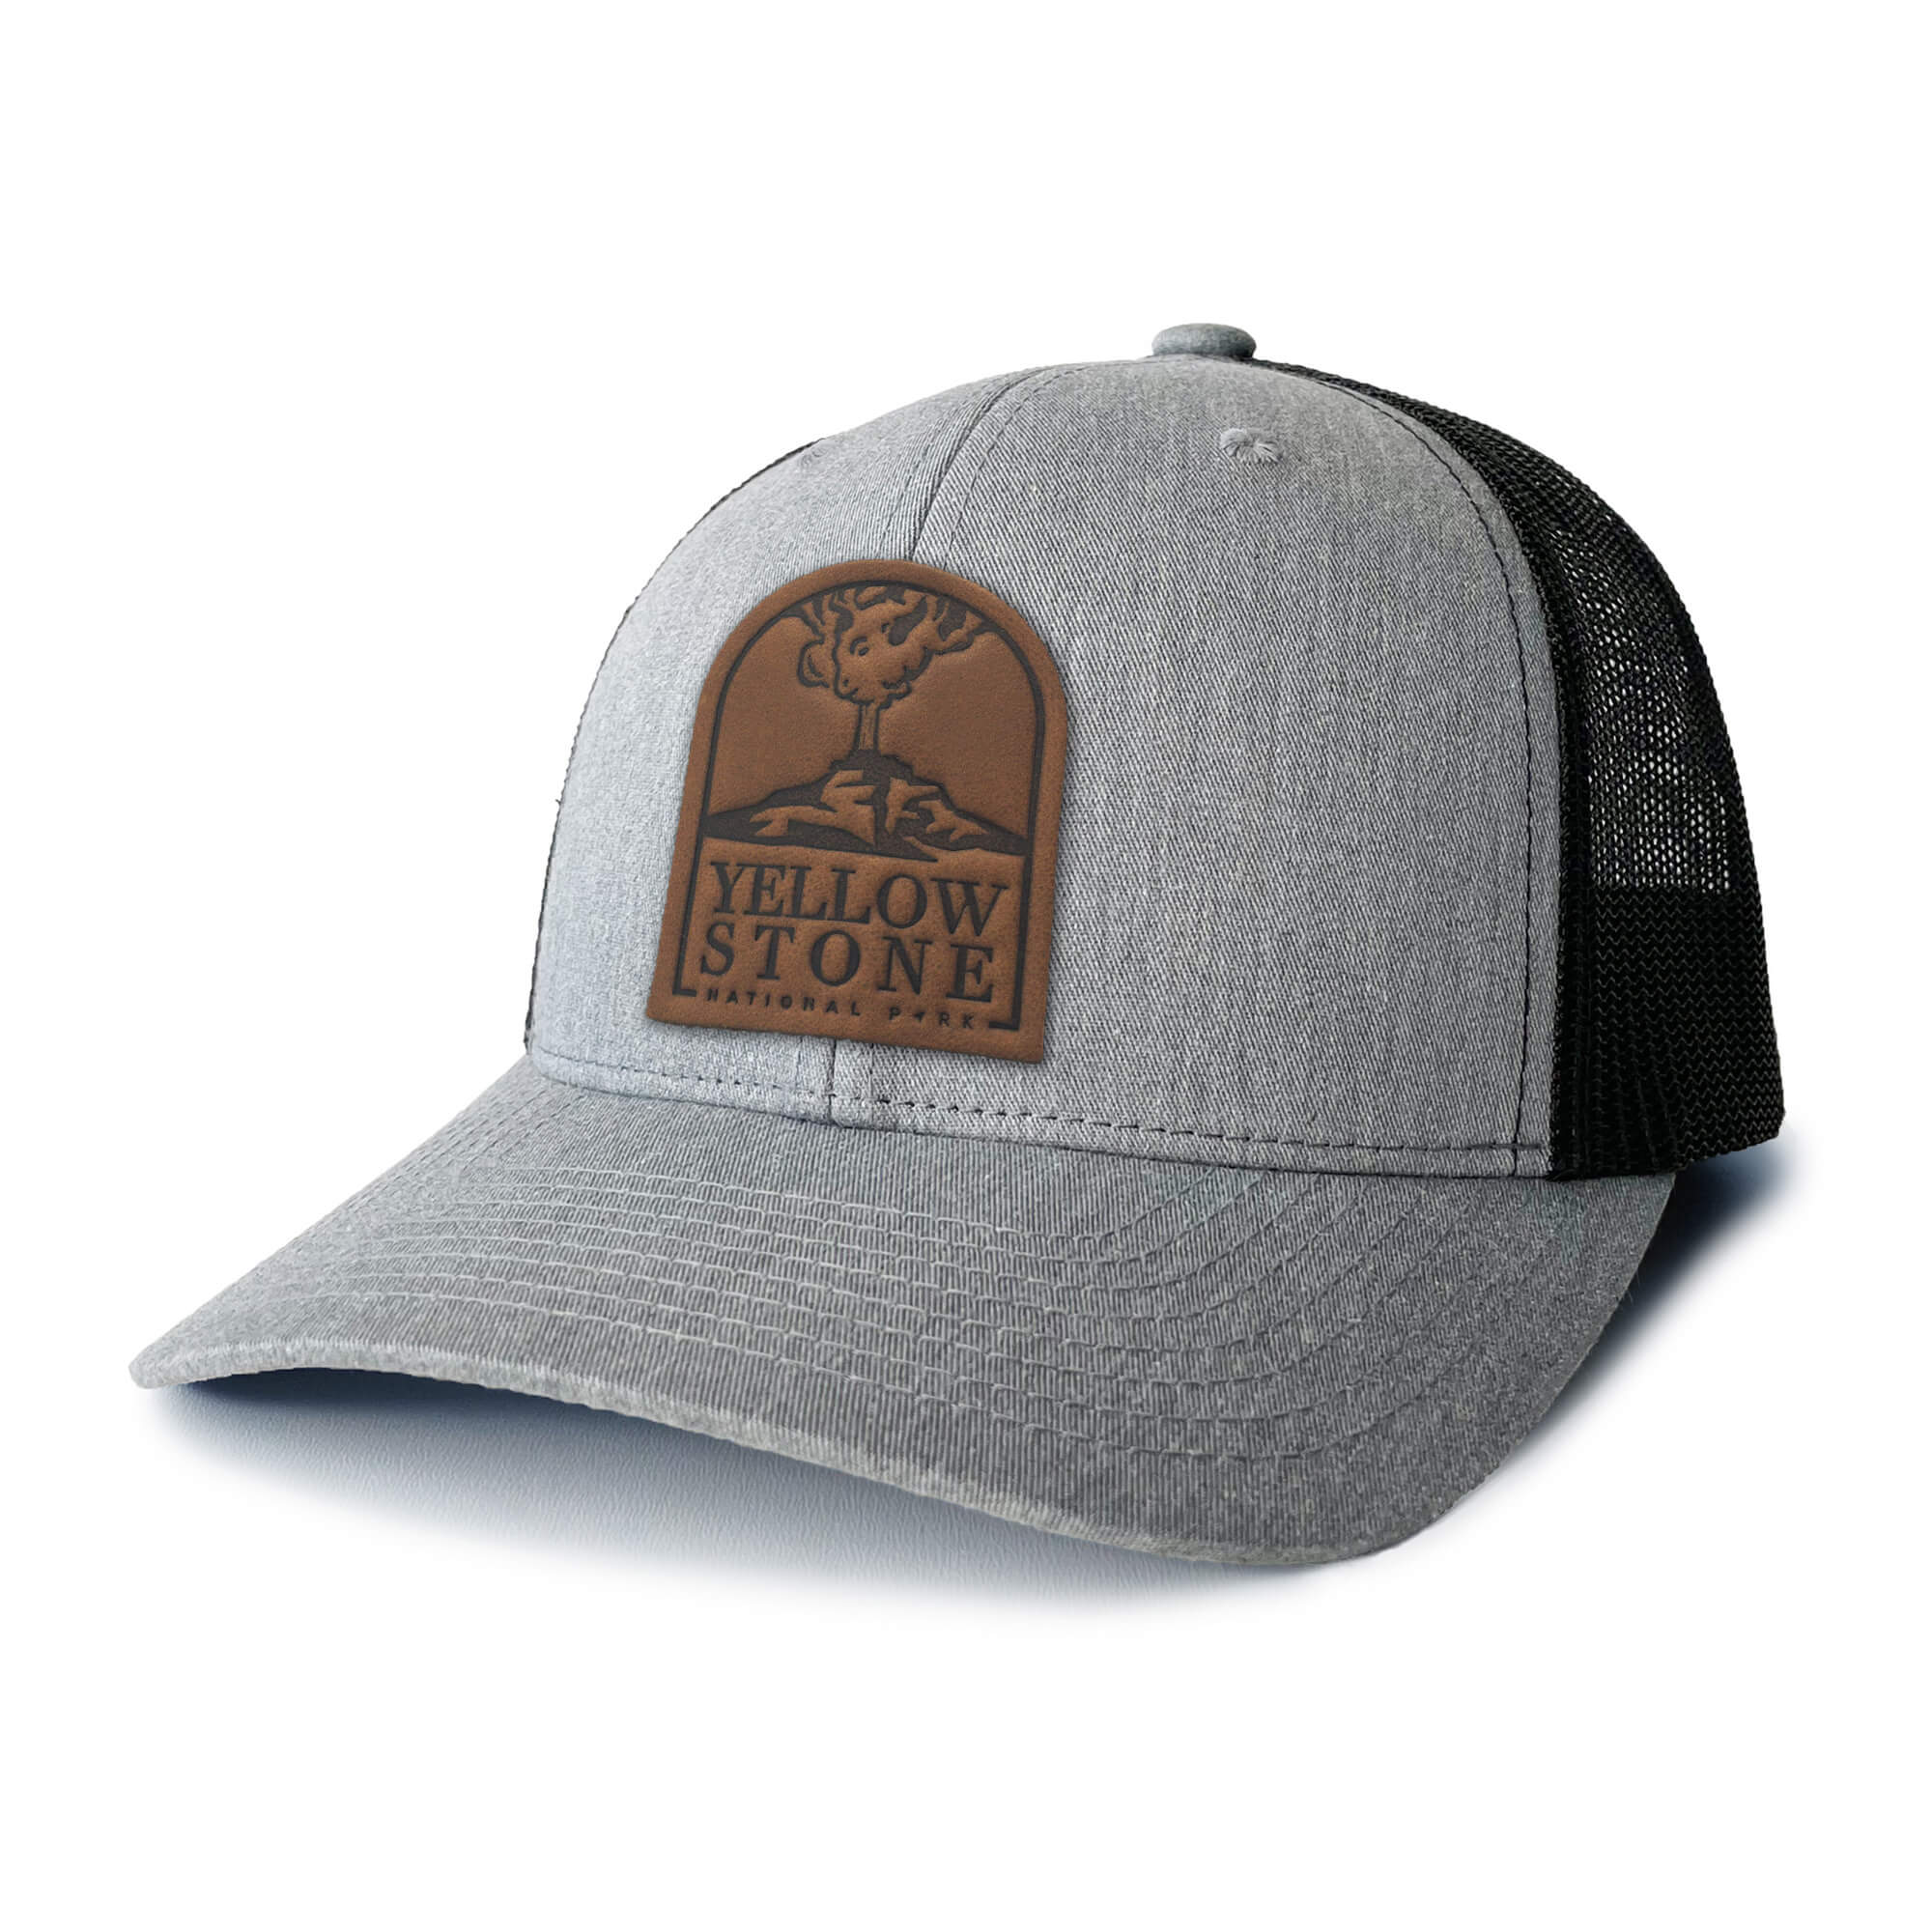 Heather grey and white trucker hat with full-grain leather patch of Yellowstone National Park | BLACK-007-005, CHARC-007-005, NAVY-007-005, HGREY-007-005, MOSS-007-005, BROWN-007-005